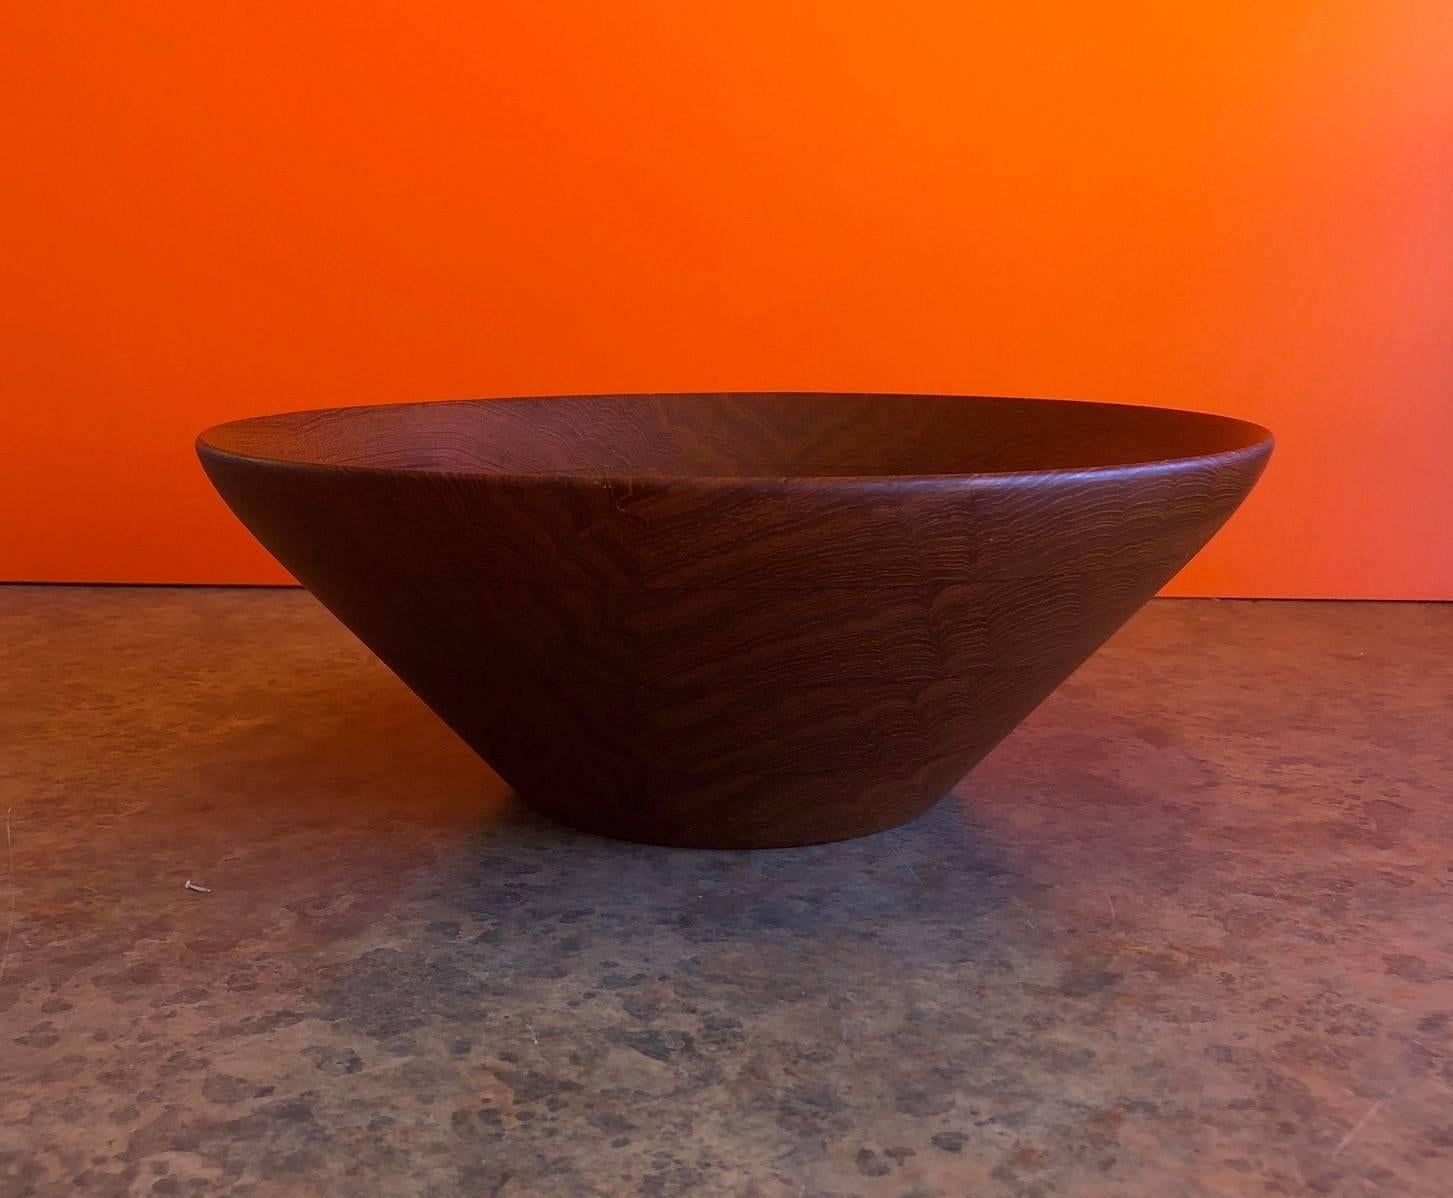 Danish modern staved teak bowl by Digsmed, circa 1960s. The bowl, which measures 12